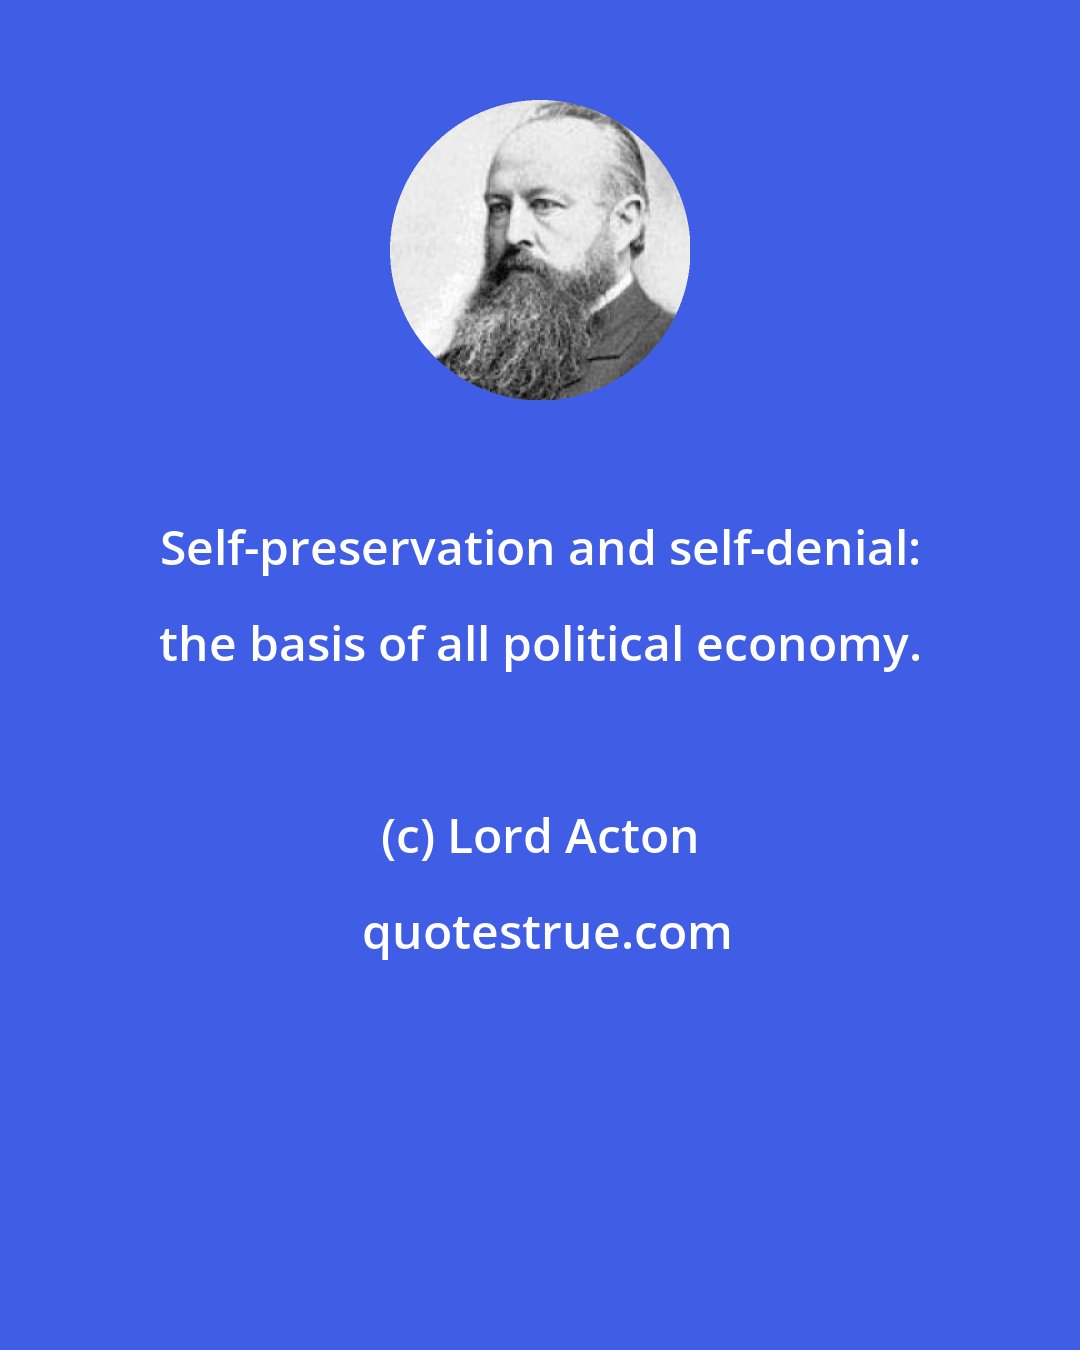 Lord Acton: Self-preservation and self-denial: the basis of all political economy.